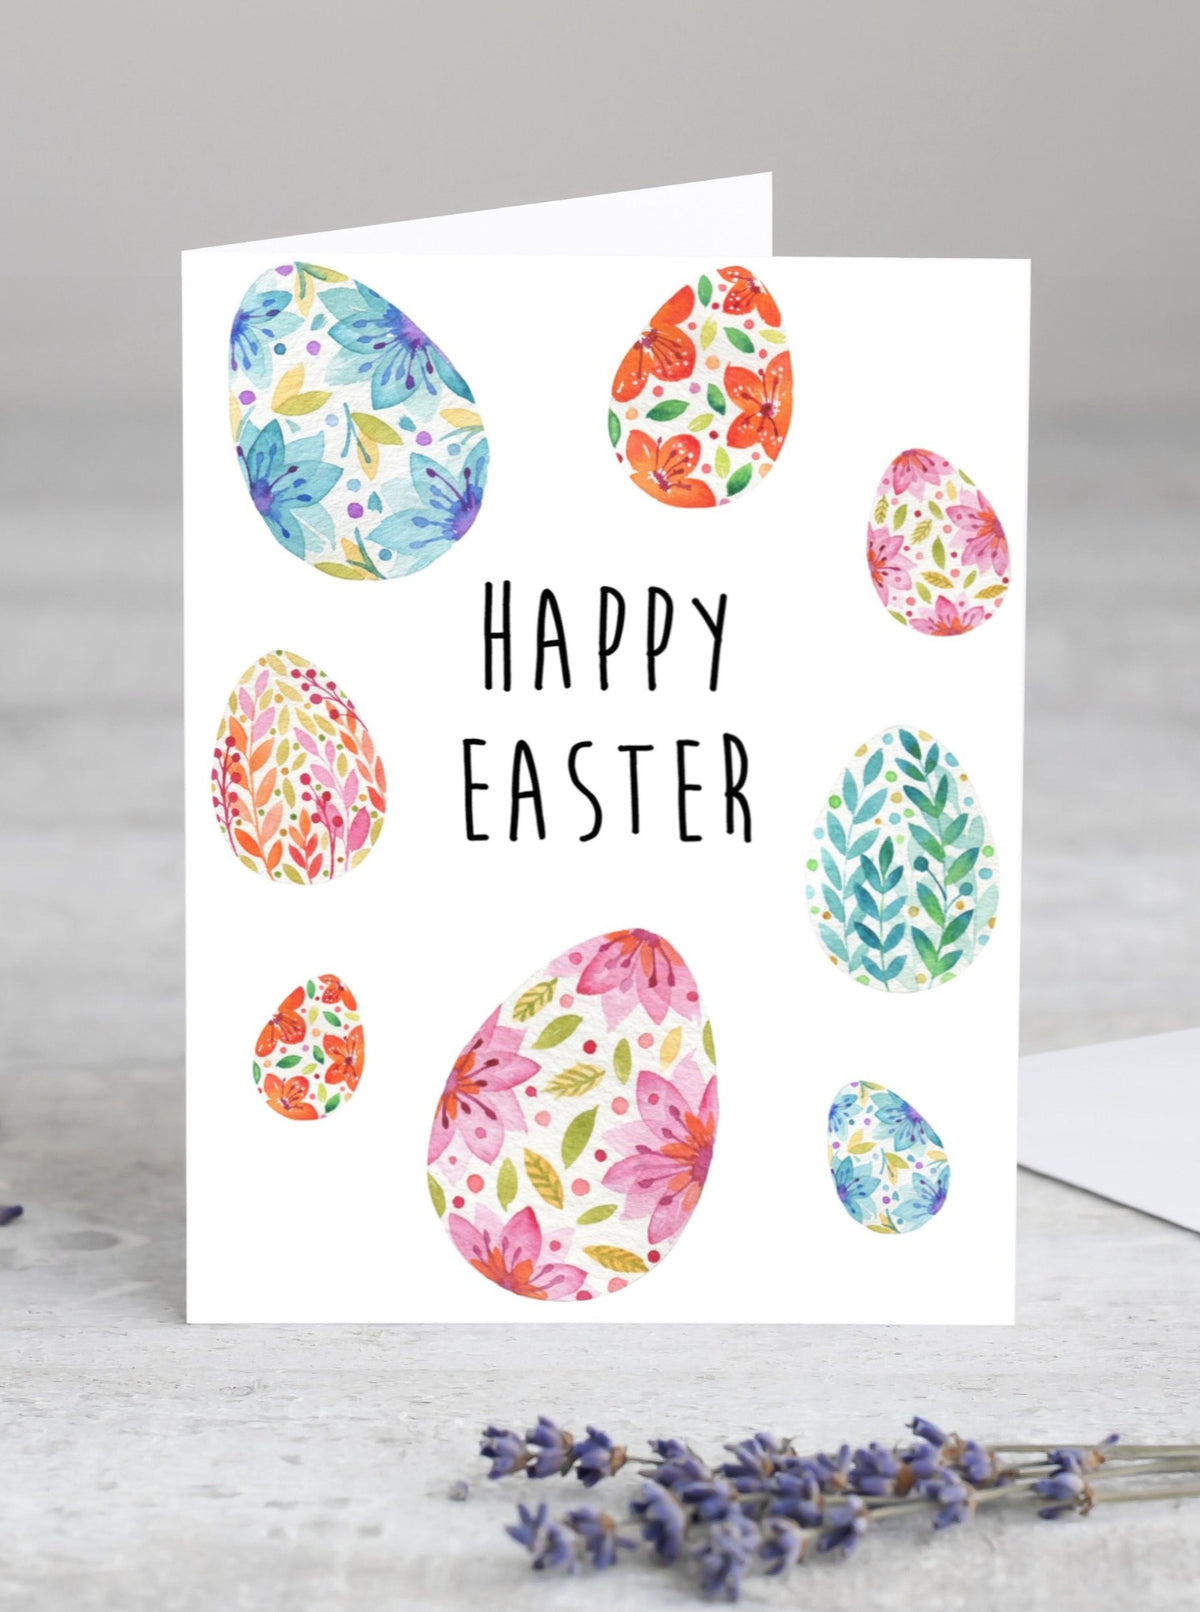 Happy Easter Card,Easter Basket Gifts for Kids,Easter Gift Ideas,Christian Easter Gift,Catholic Greeting Cards,Religious Greeting Cards